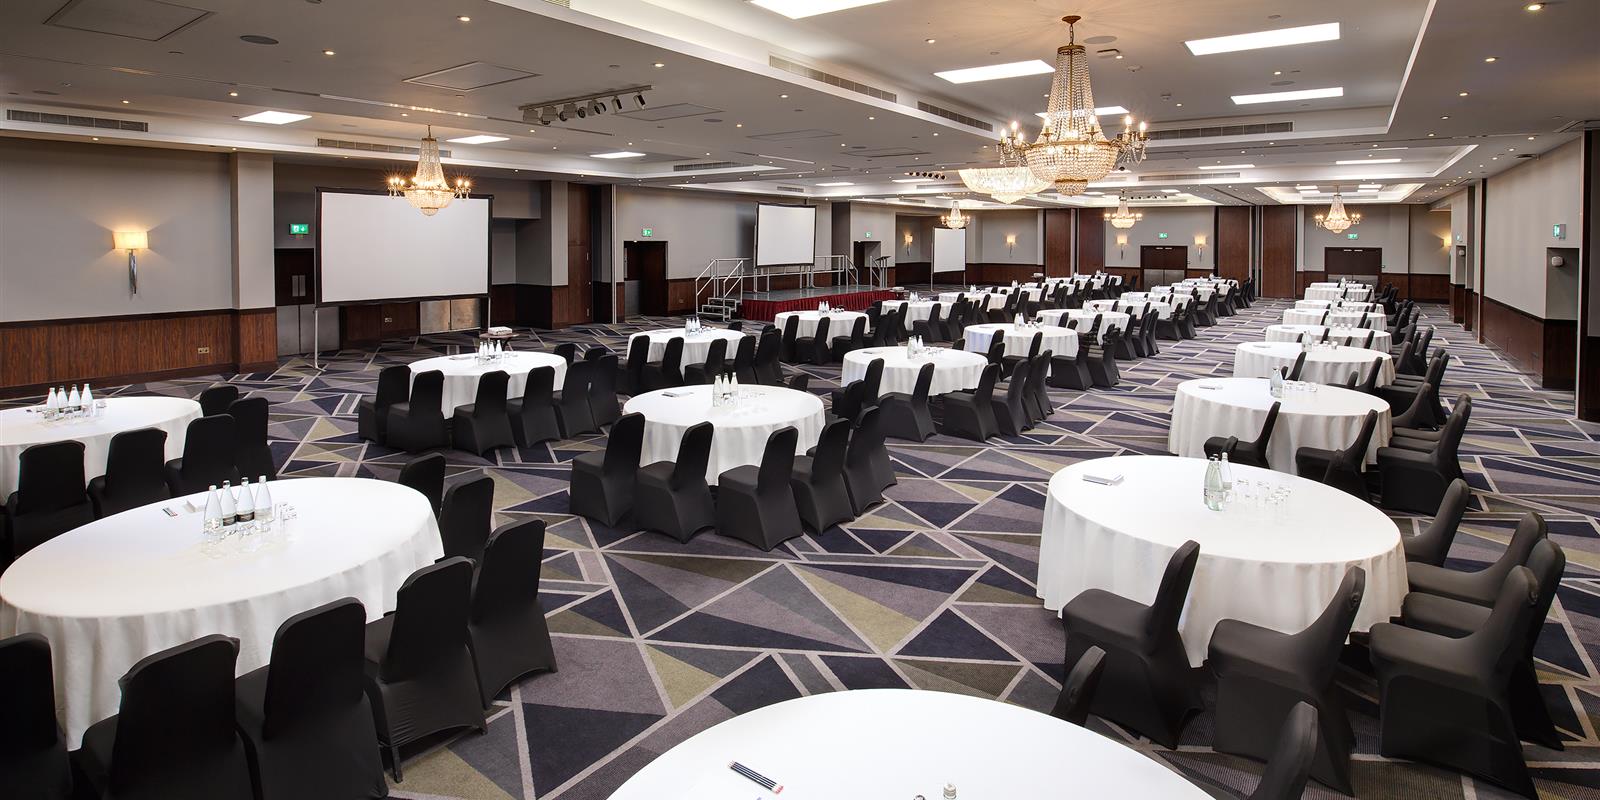 Royal National Galleon Suite Conference Venues & Meeting Rooms in London